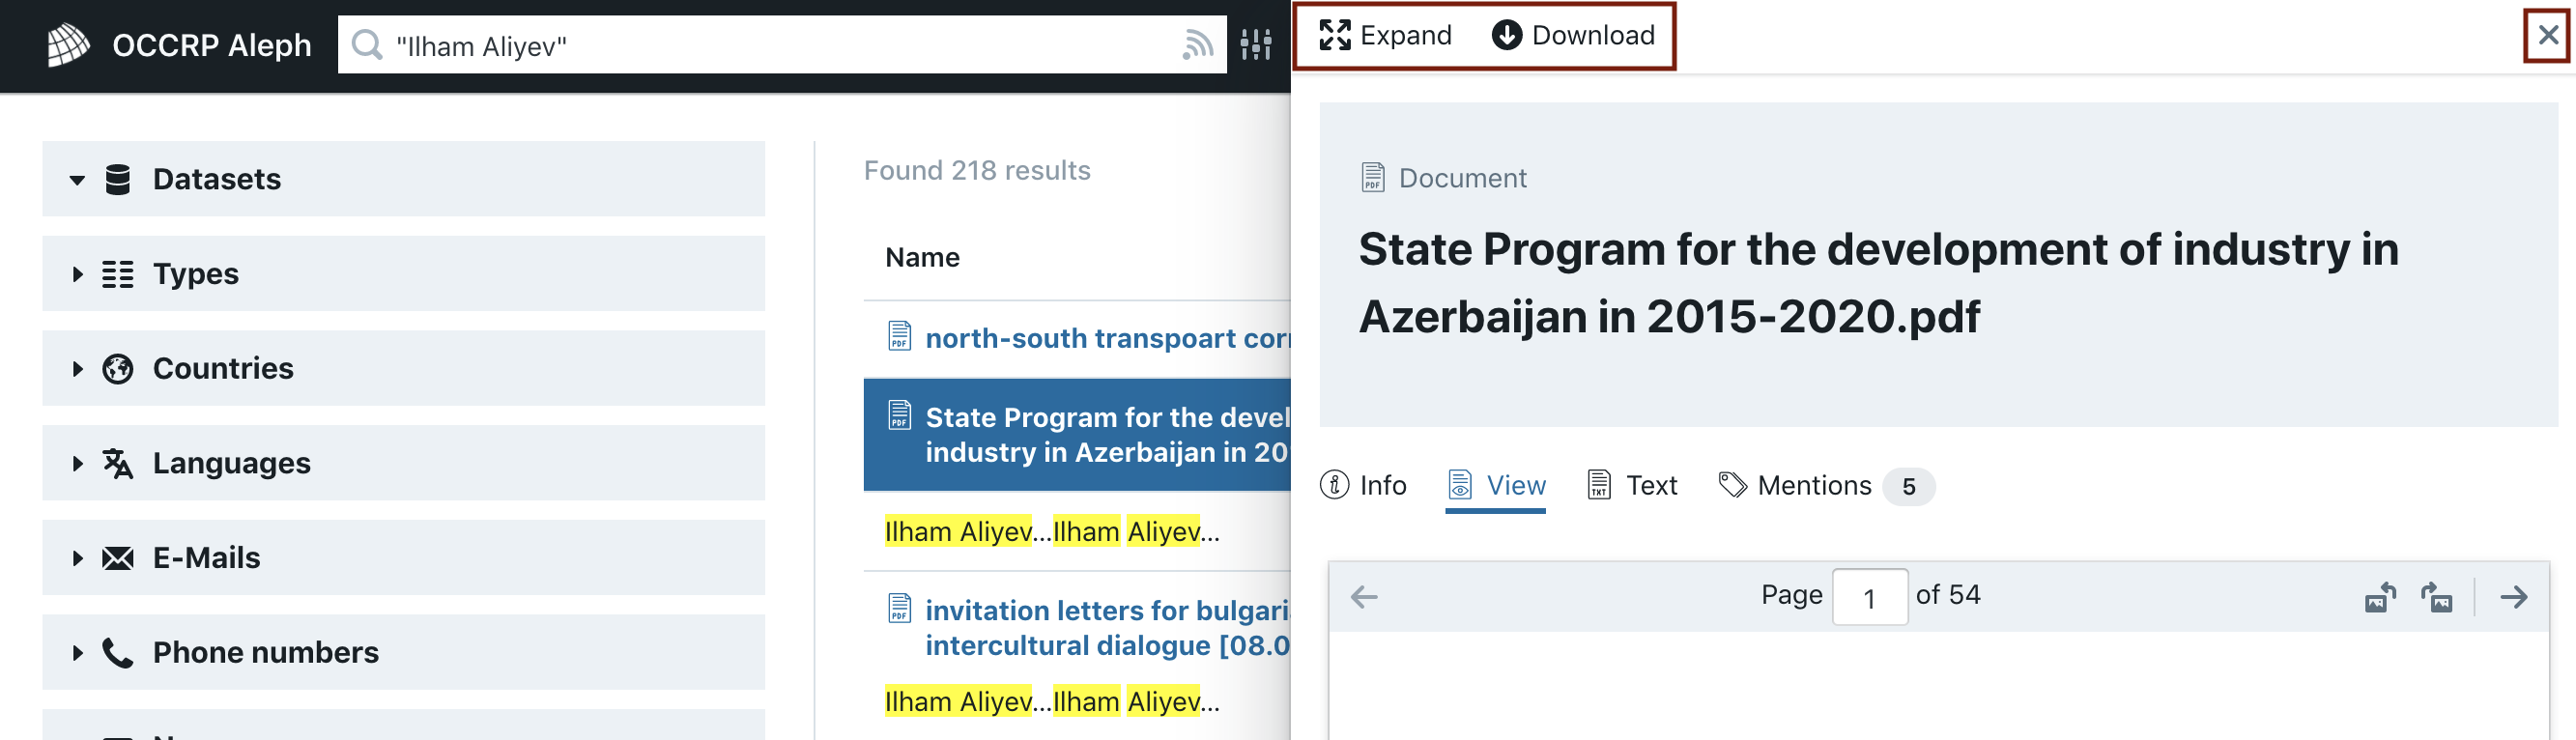 A screenshot of the search results page in Aleph. A preview of a search result, a PDF document, is alighned to the right side of the screen and overlays the search results page. The preview includes the name of the document and shows the first page of the document. Red markers highlight the “Expand”, “Download”, and “Close” buttons at the top of the preview overlay.